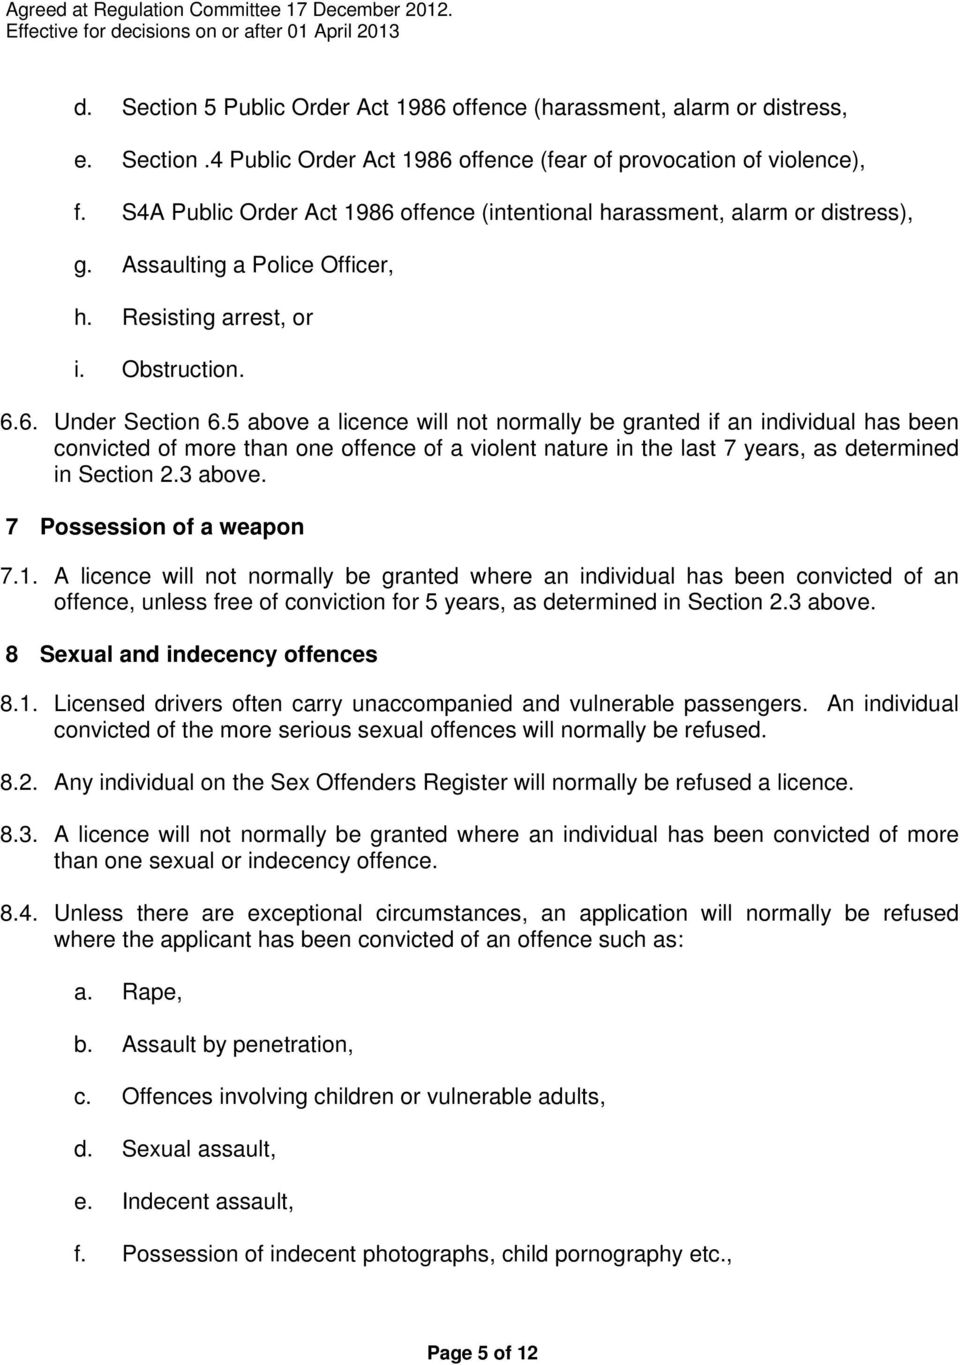 5 above a licence will not normally be granted if an individual has been convicted of more than one offence of a violent nature in the last 7 years, as determined in Section 2.3 above.